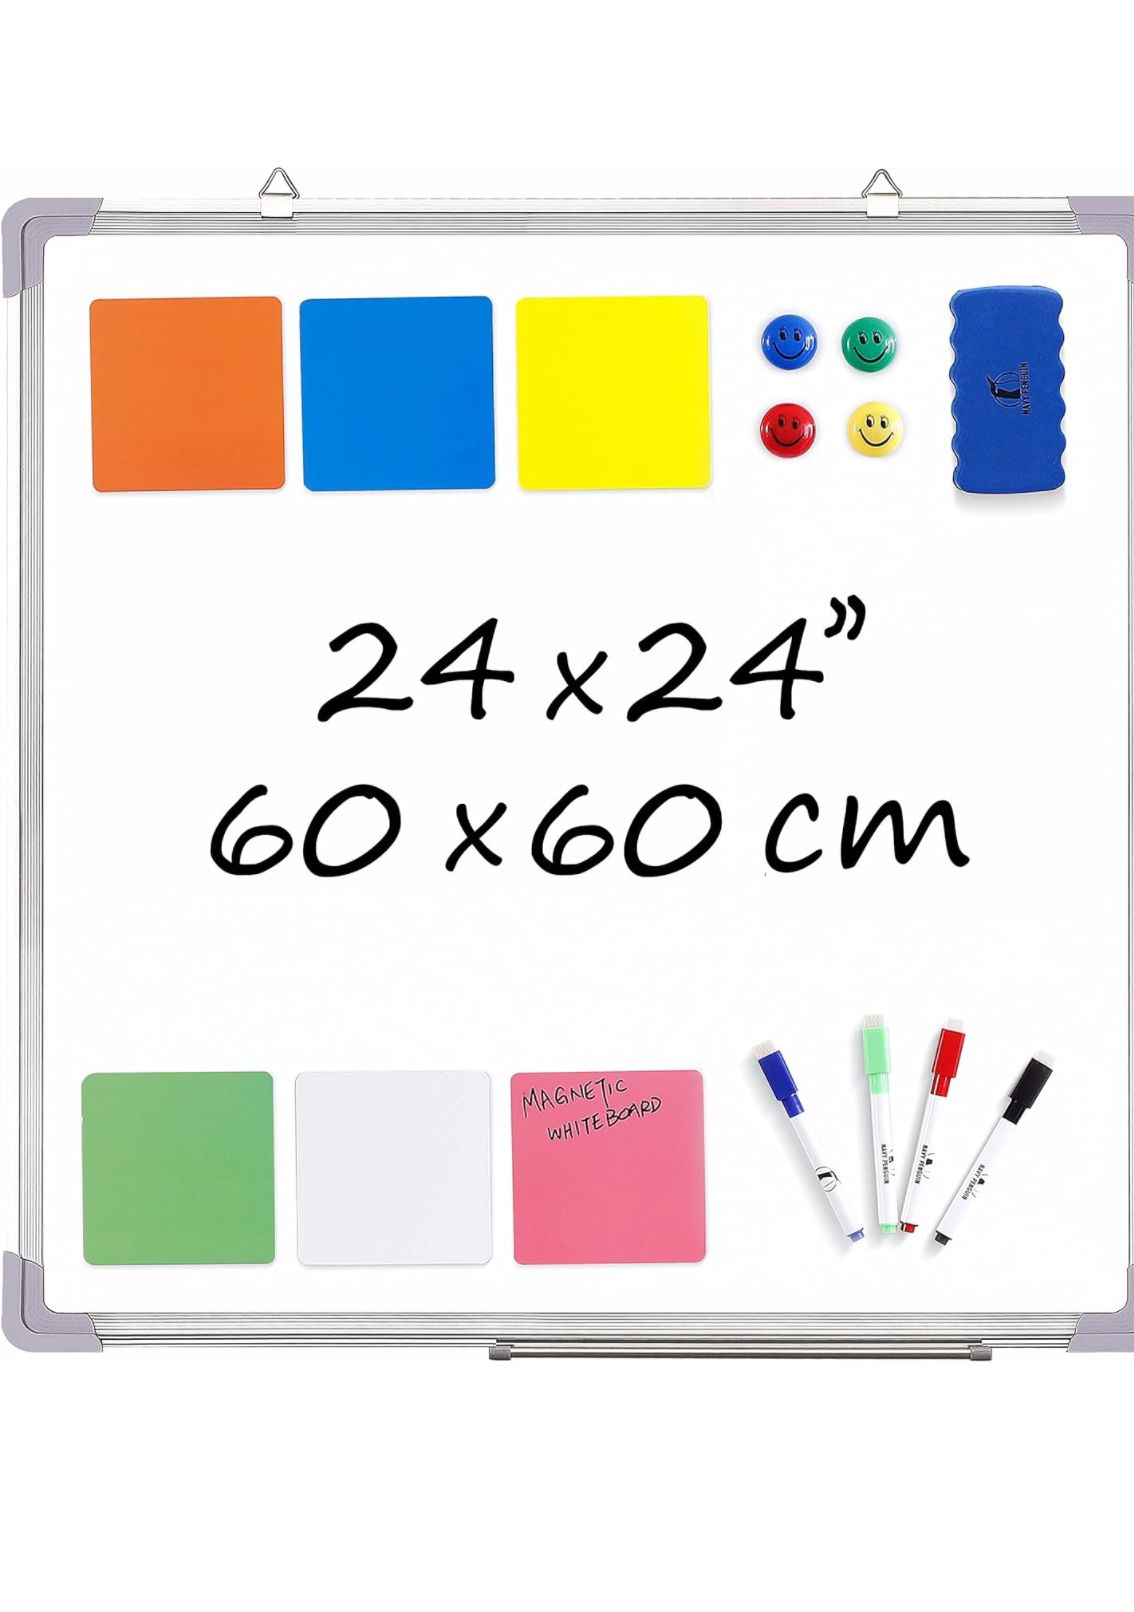 Whiteboard Set - Dry Erase Board 24 x 24" with 1 Magnetic Eraser, 4 Dry Wipe Markers, 4 Magnets and 6 Magnetic Labels - Wall Hanging Reminder Kanban W